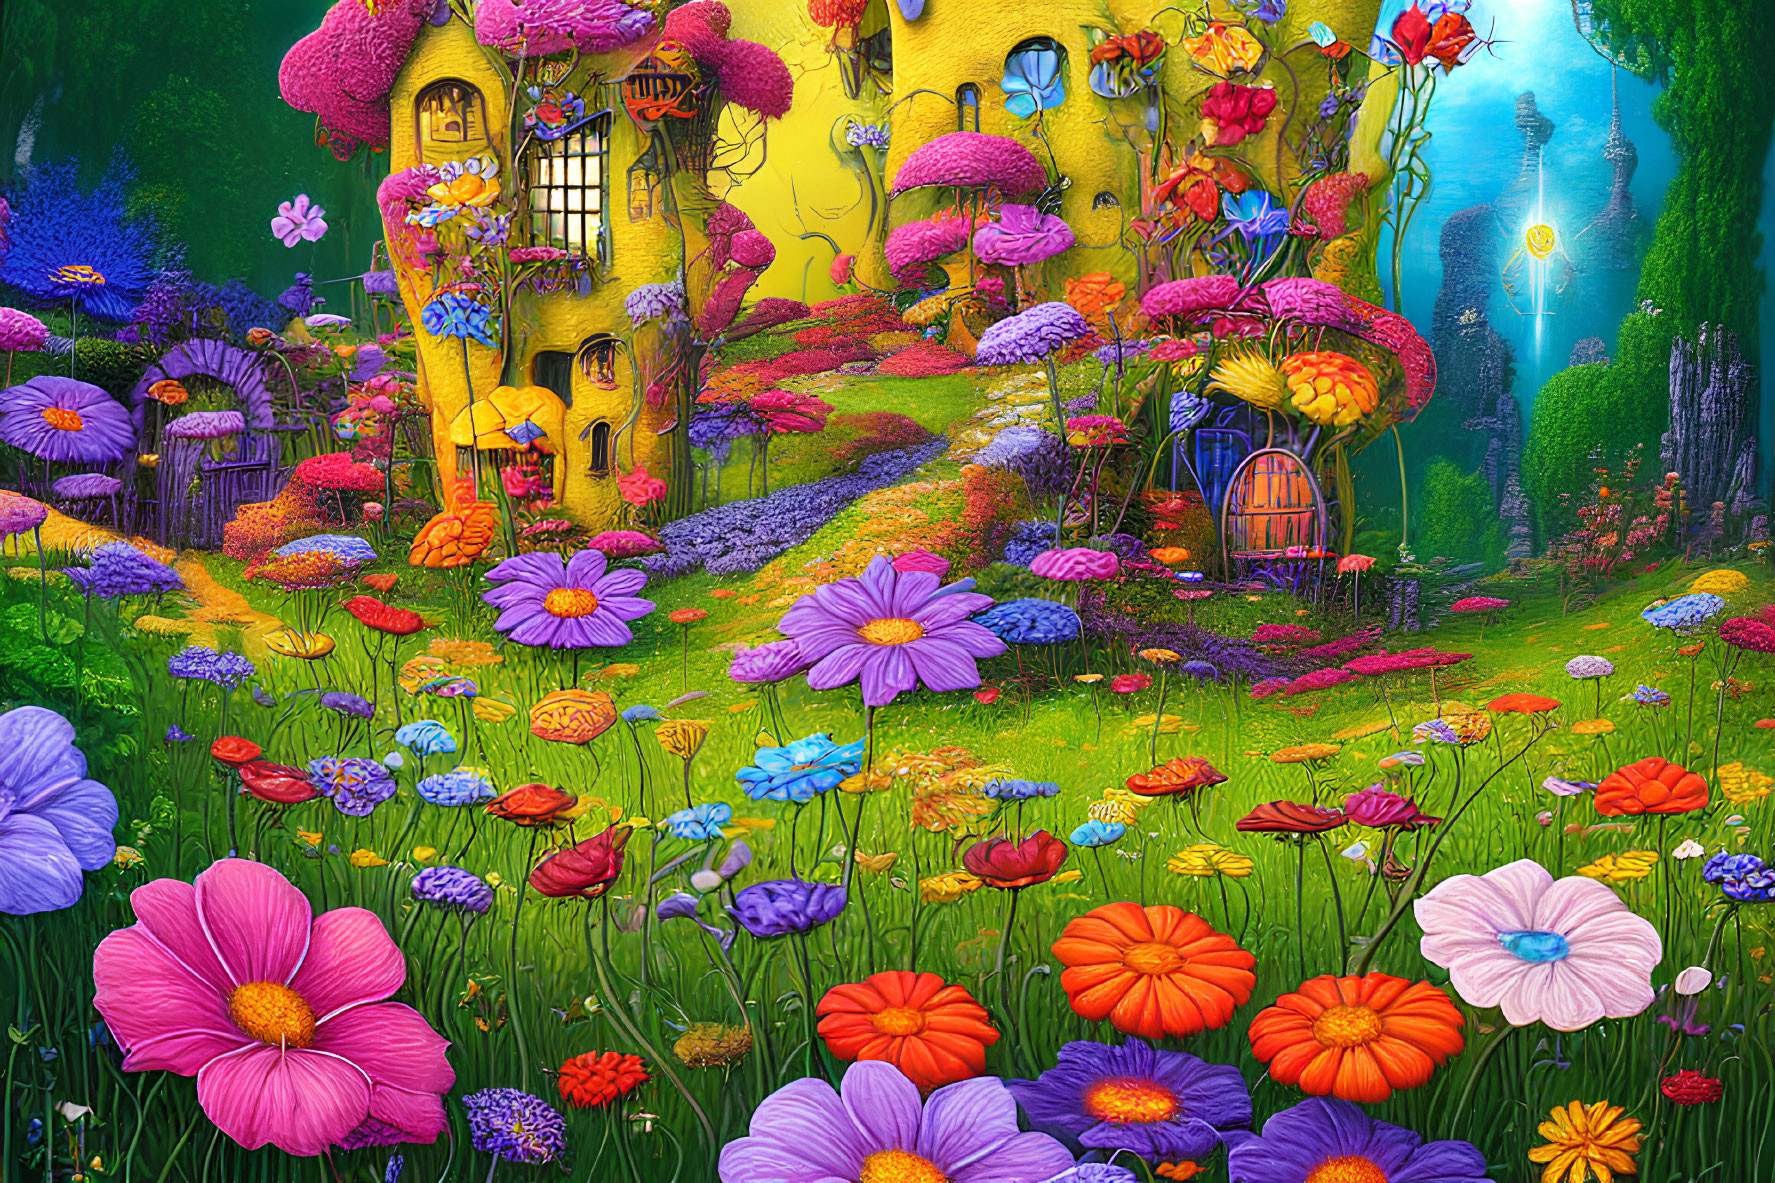 Colorful fantasy garden with whimsical yellow house and vibrant flowers under magical sky